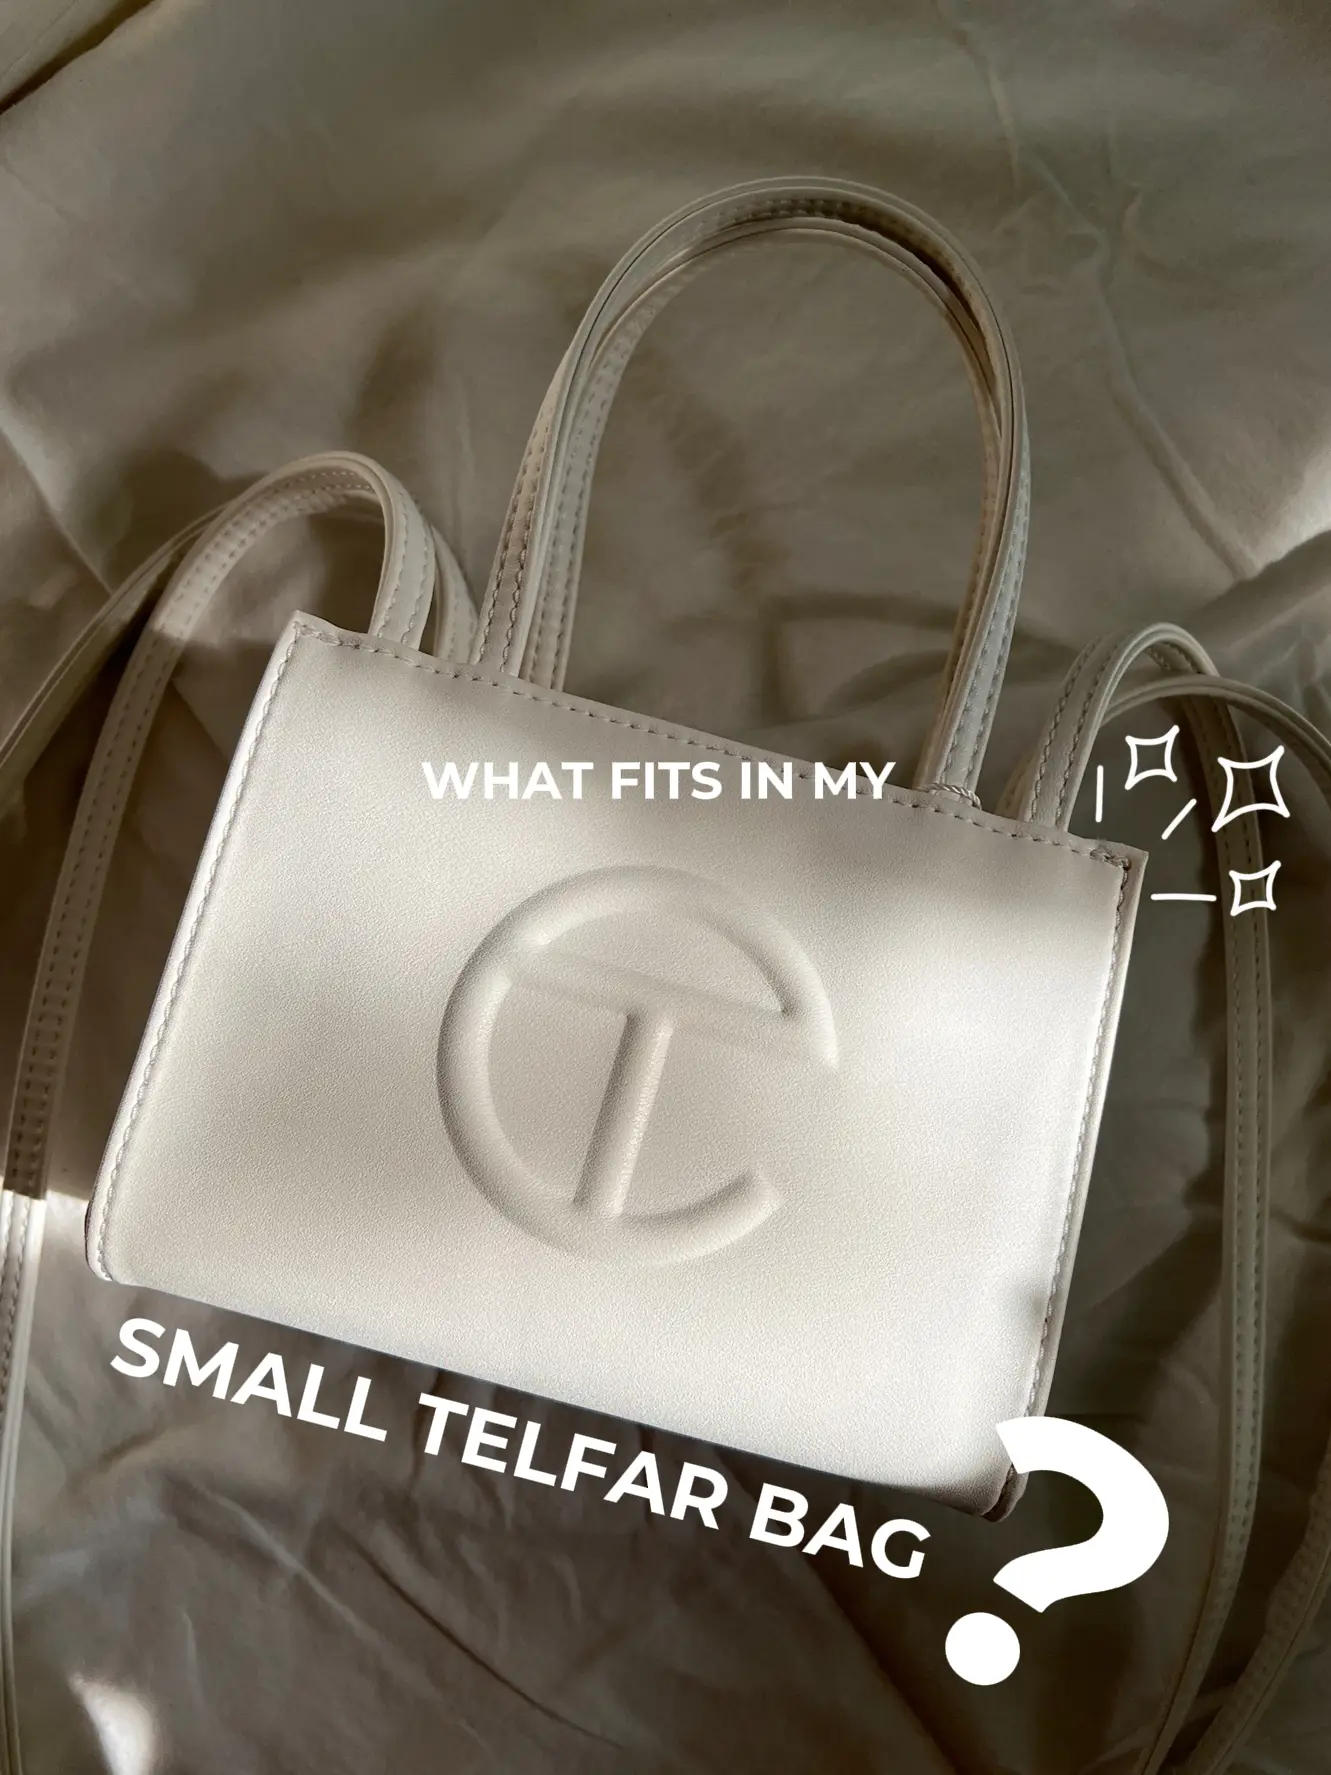 HOW TO GET A #TELFAR BAG  COLLECTION & SIZE COMPARISON FT